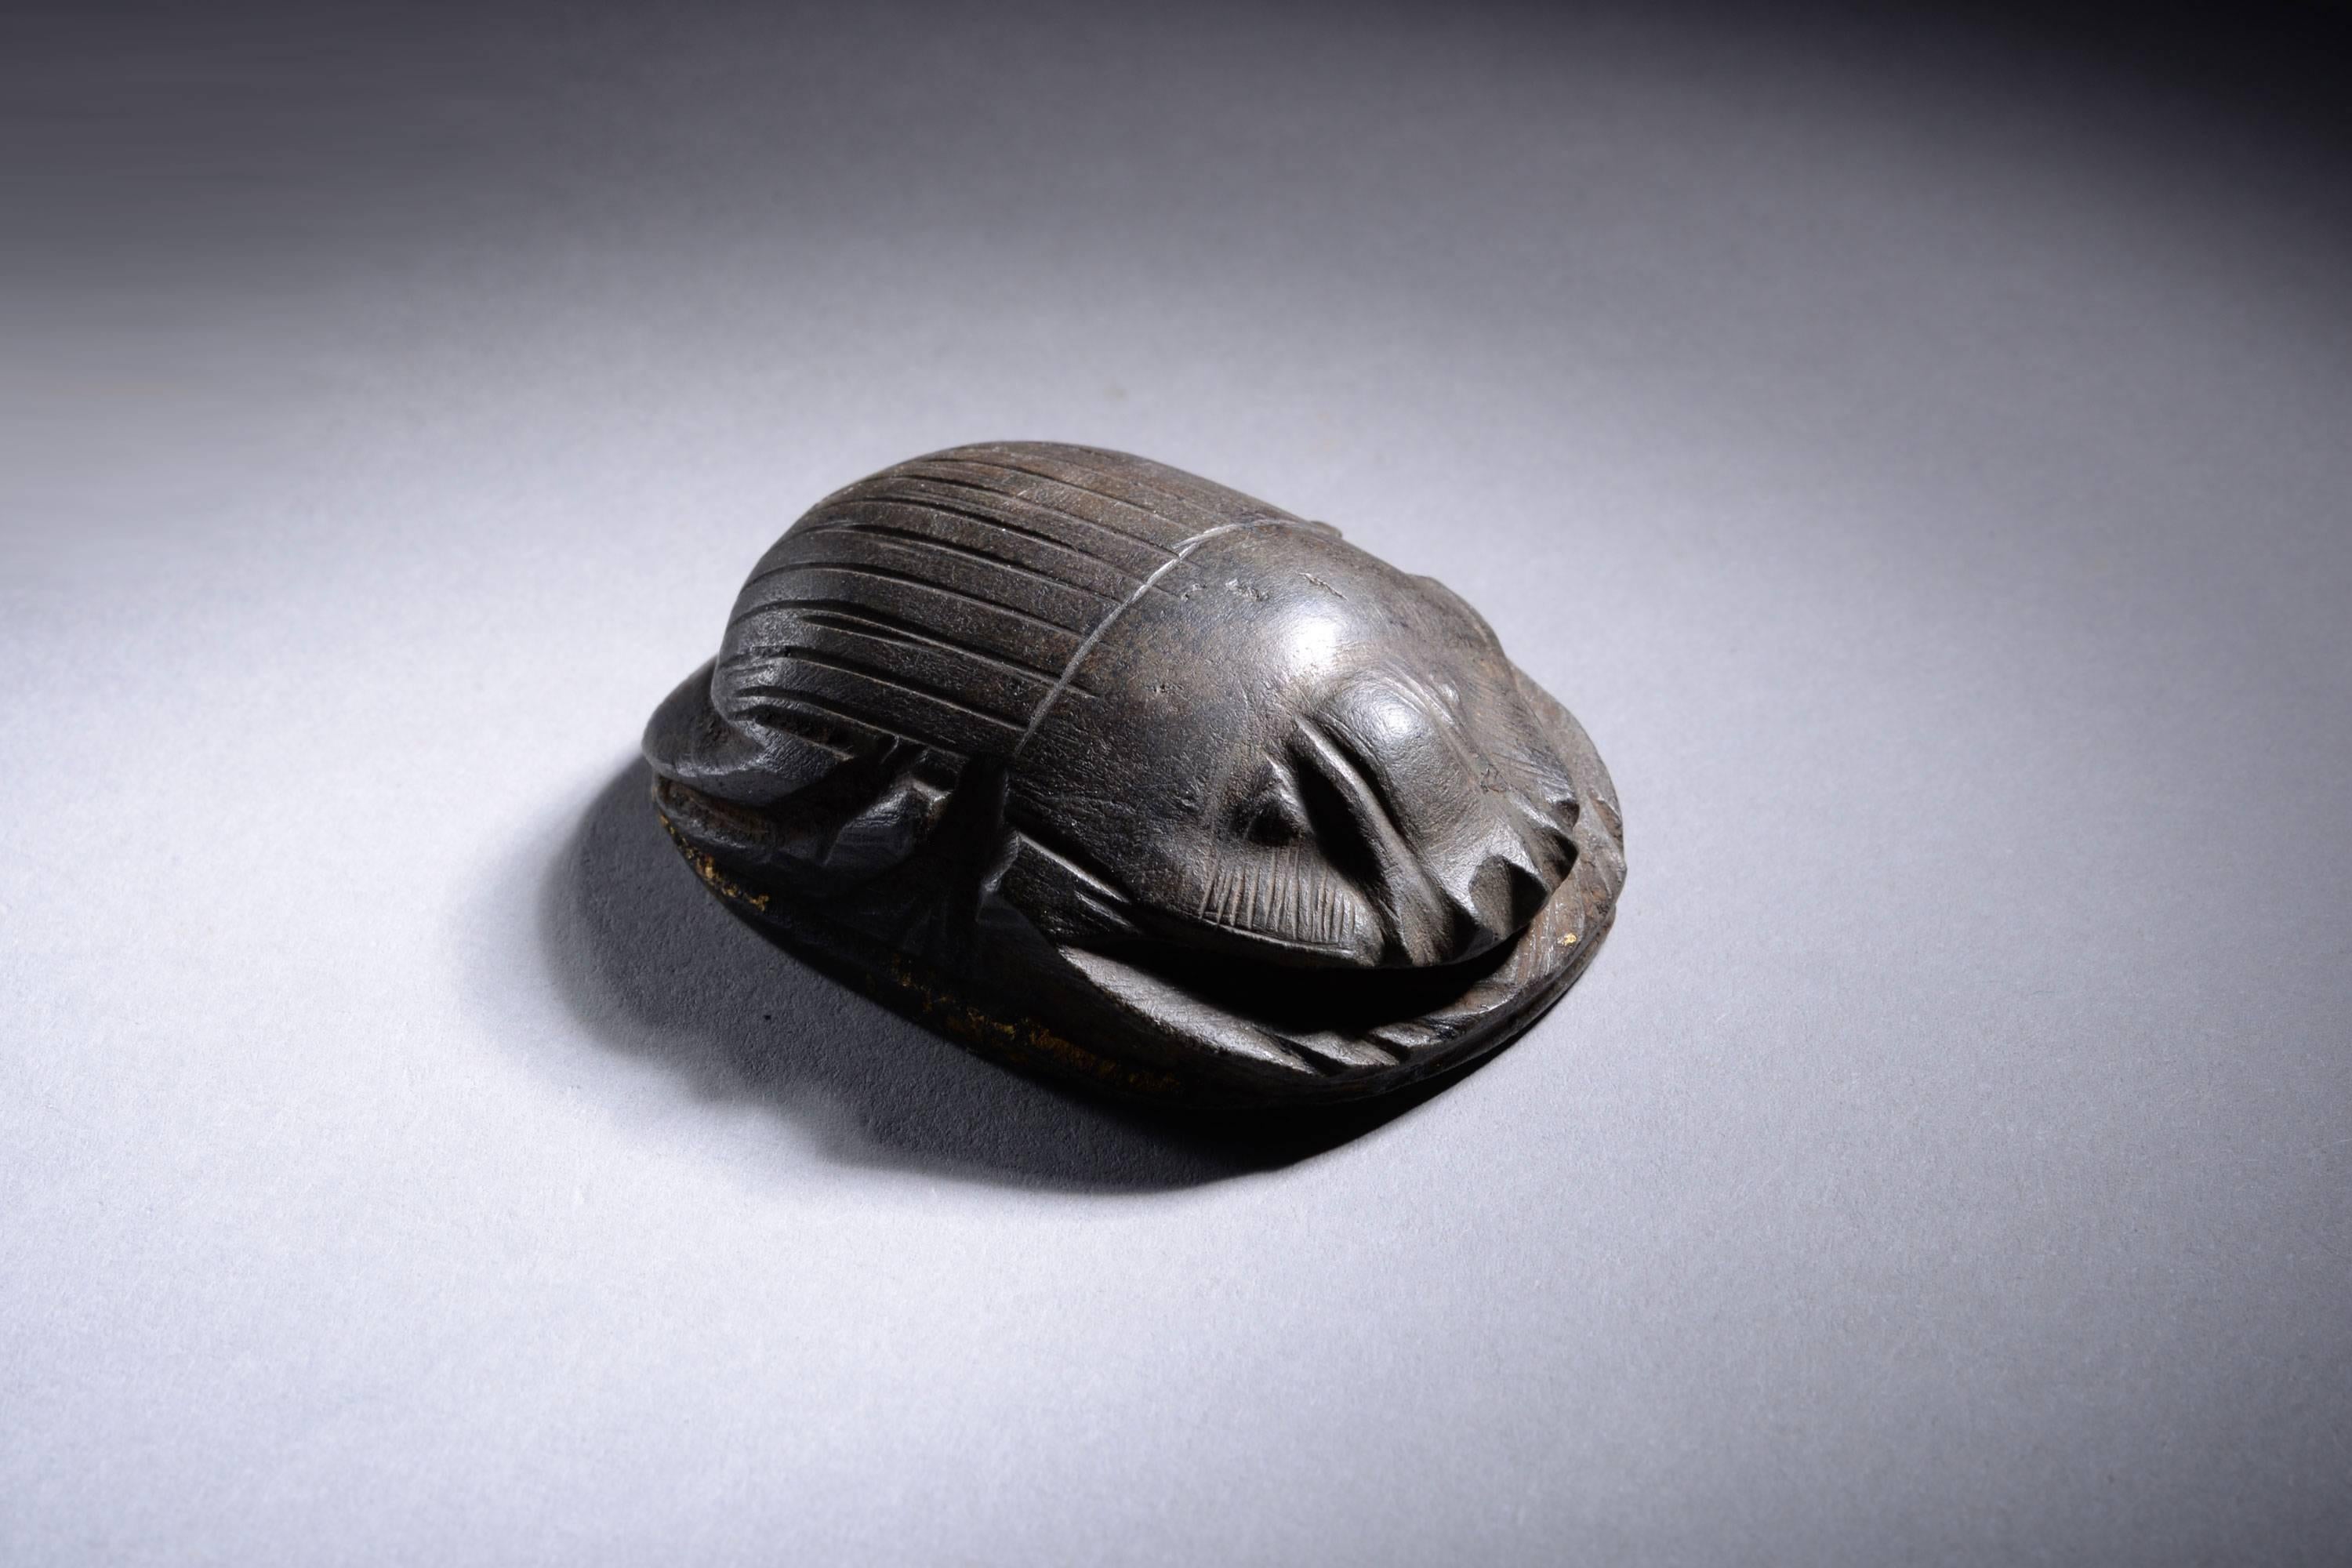 A large ancient Egyptian hardstone heart scarab of fine quality, dating to the Late Period, c. 664 - 332 BC.

Naturalistically carved from black schist or similar hardstone, with a detailed clypeus and striated wing-case, the legs articulated, the